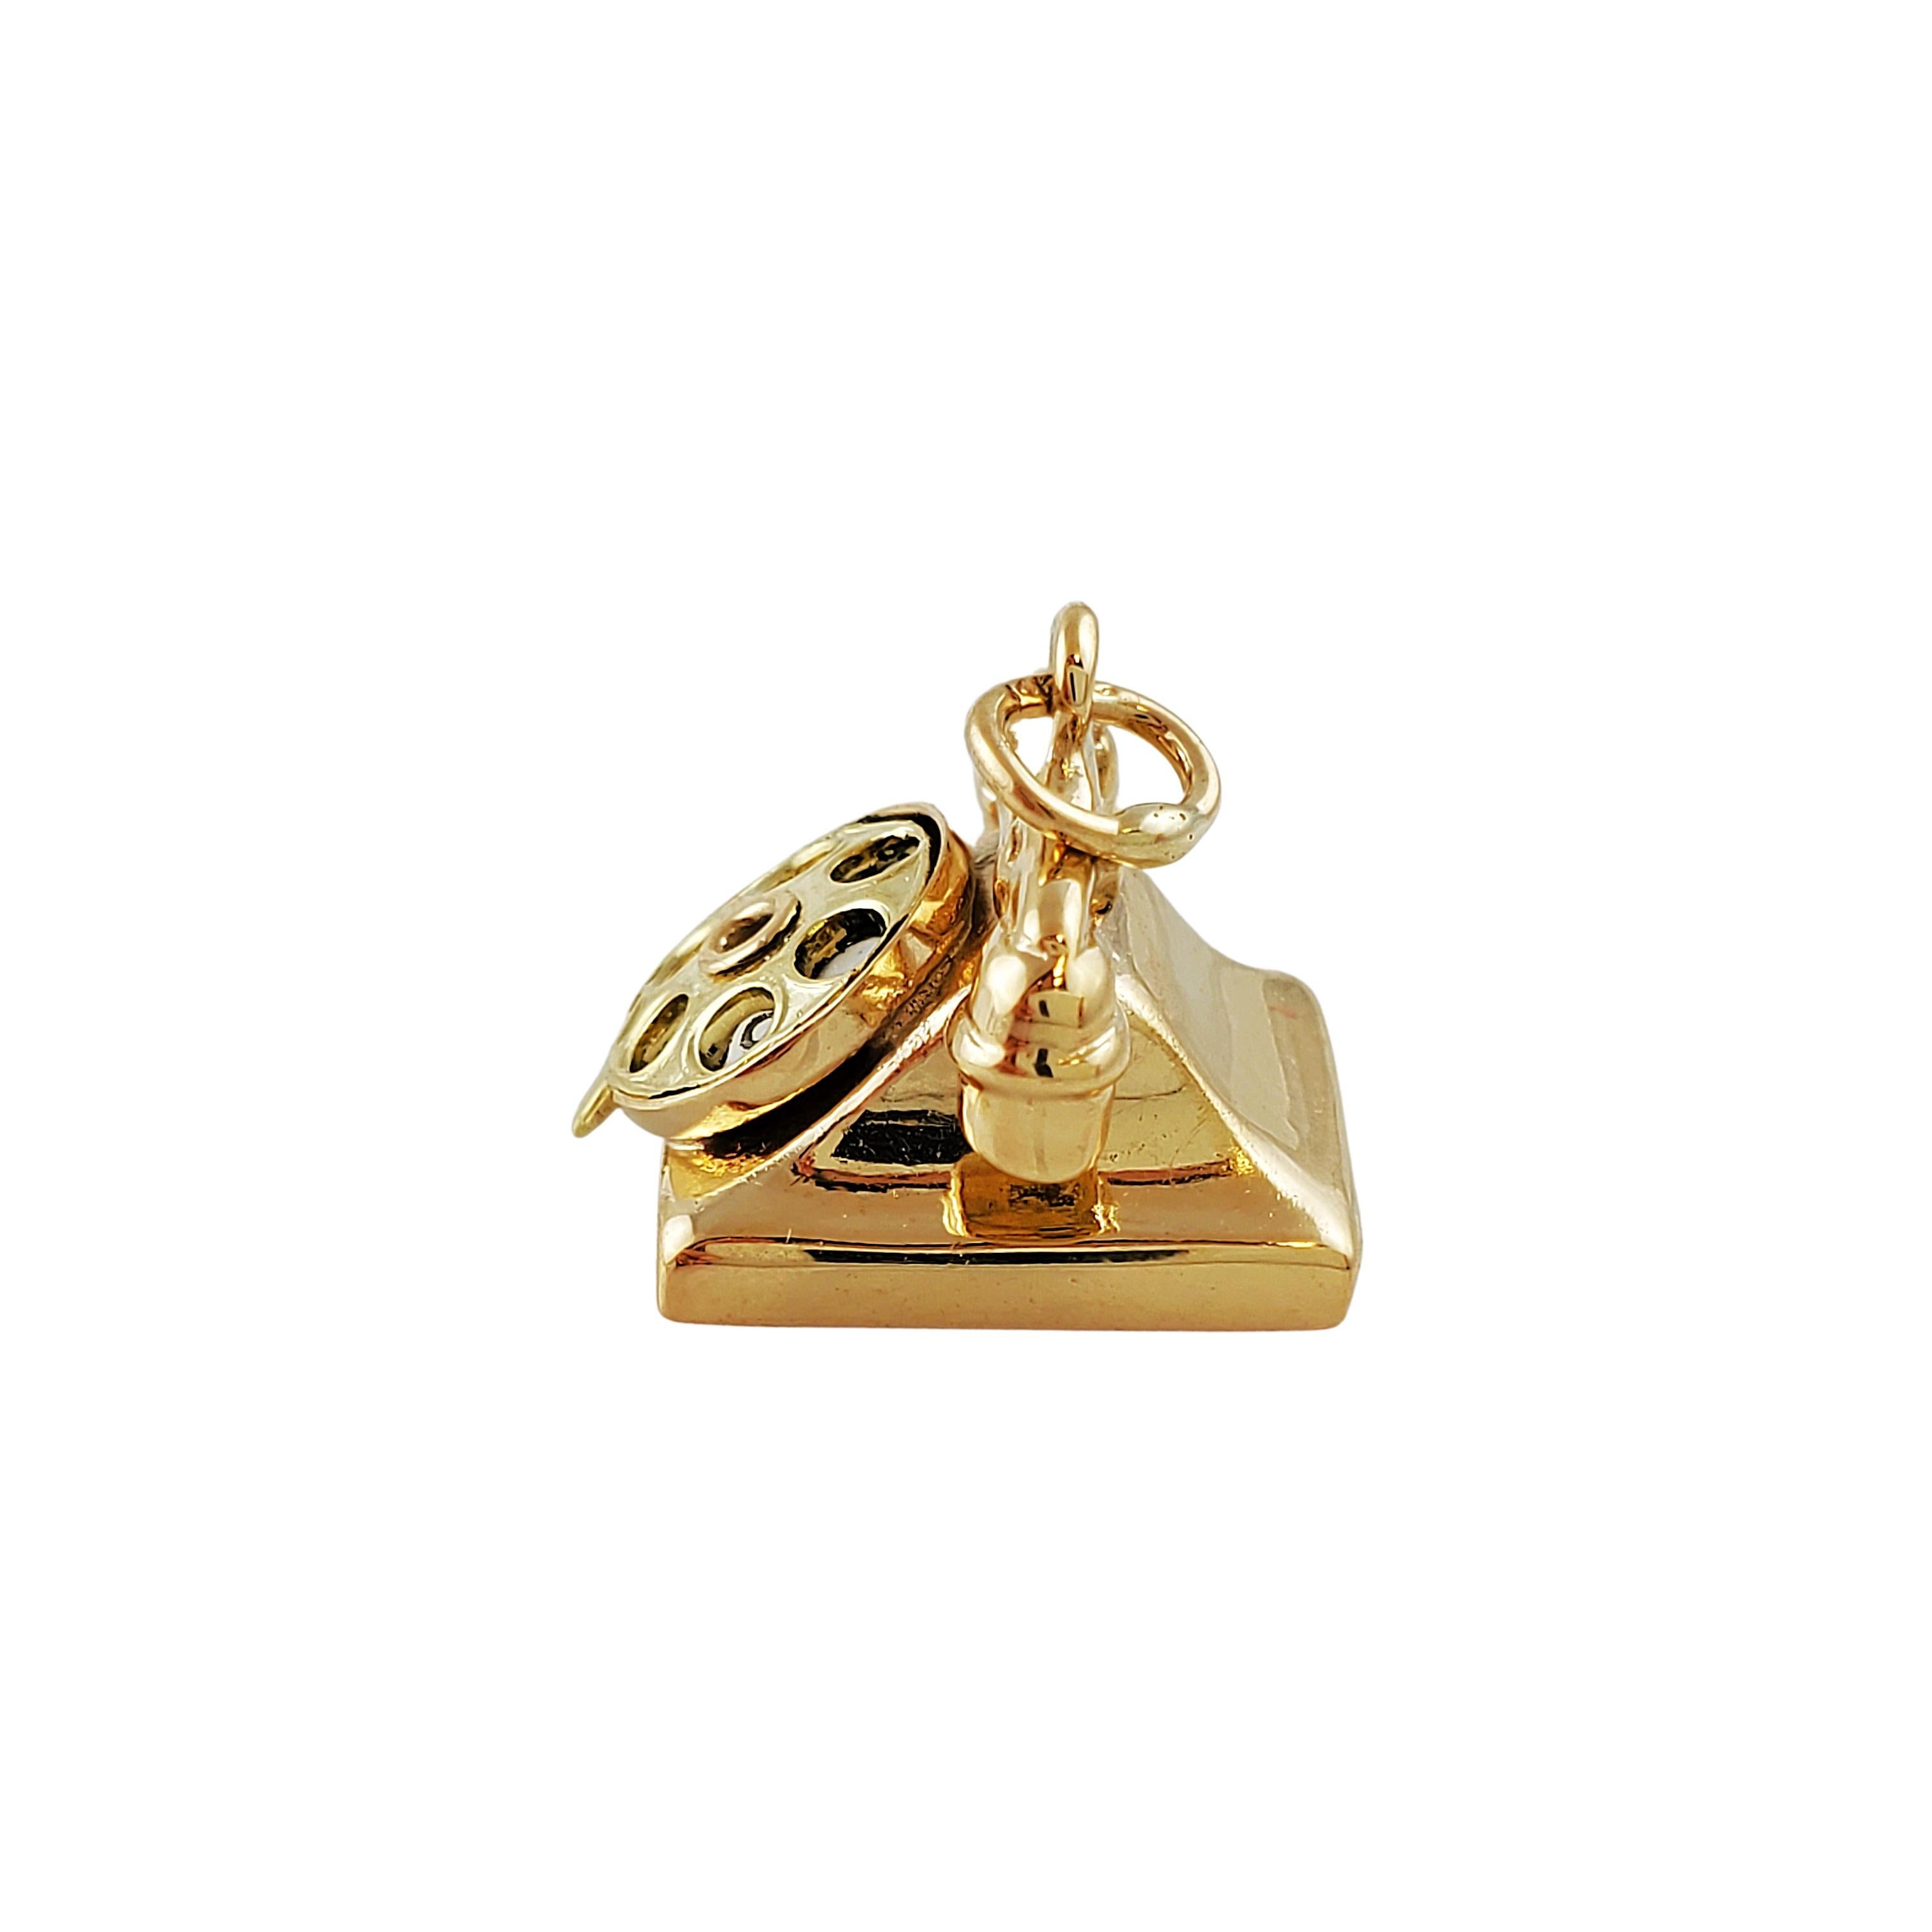 14K Yellow Gold Rotary Dial Telephone Charm 3D

Calling the past with this beautiful vintage rotary dial telephone charm.

Adorable 3D 14k yellow gold rotary dial telephone charm with a slight mechanical dial.

Size: 11mm X 13mm

Weight: 2.7 gr /